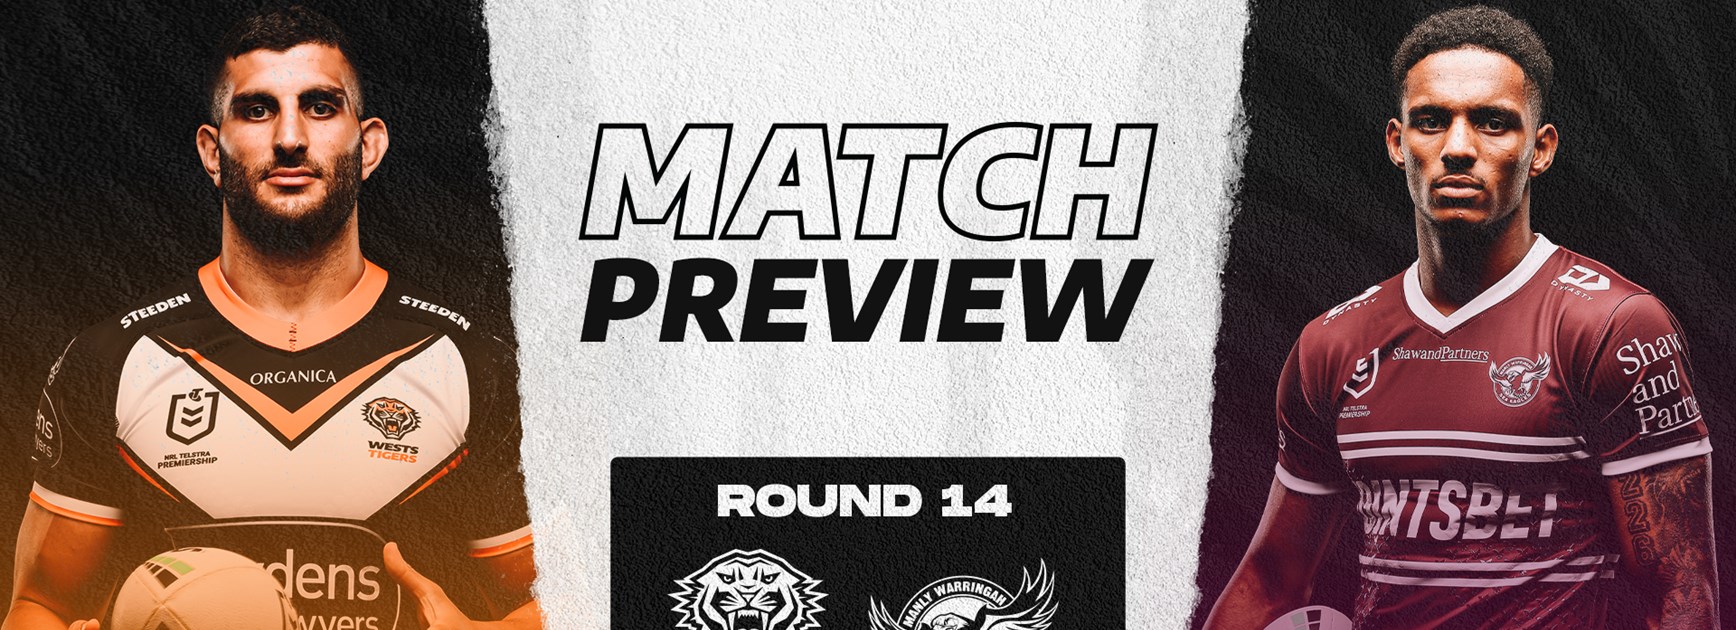 Match Preview: Round 14 vs Manly Sea Eagles